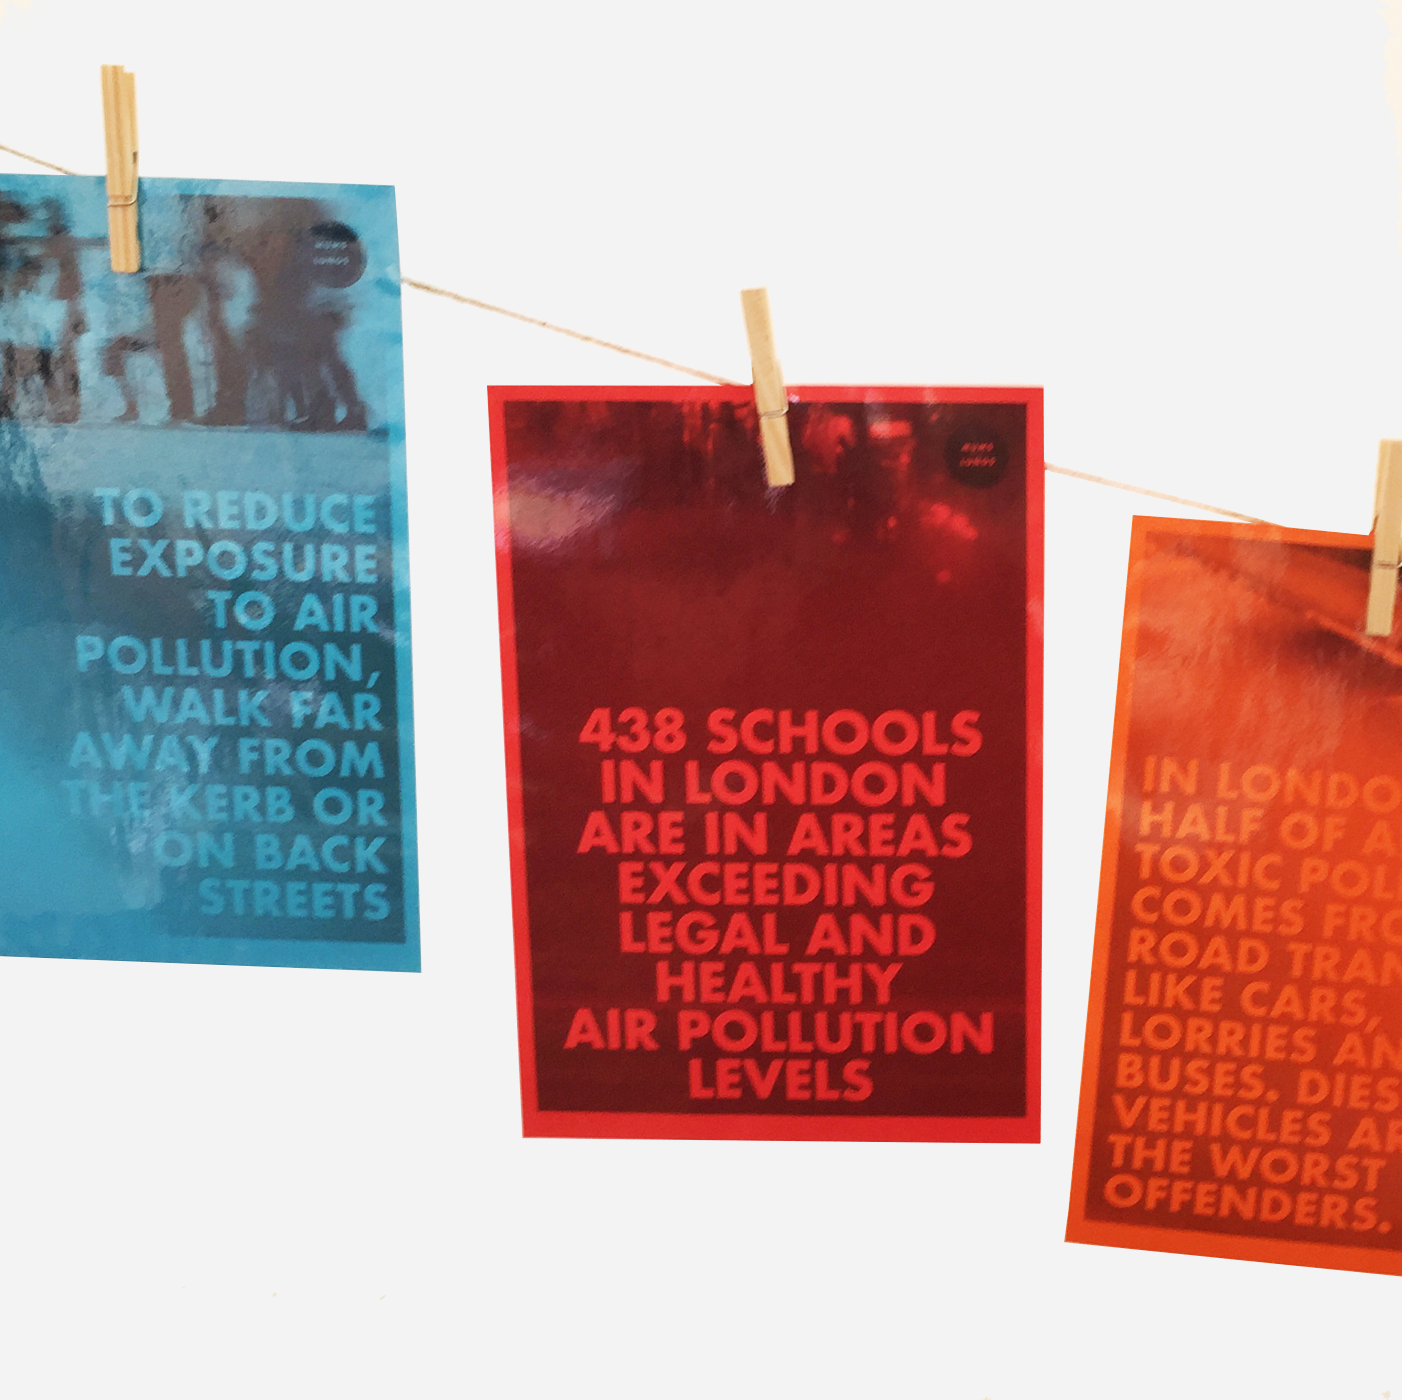 Mums For Lungs pollution poster